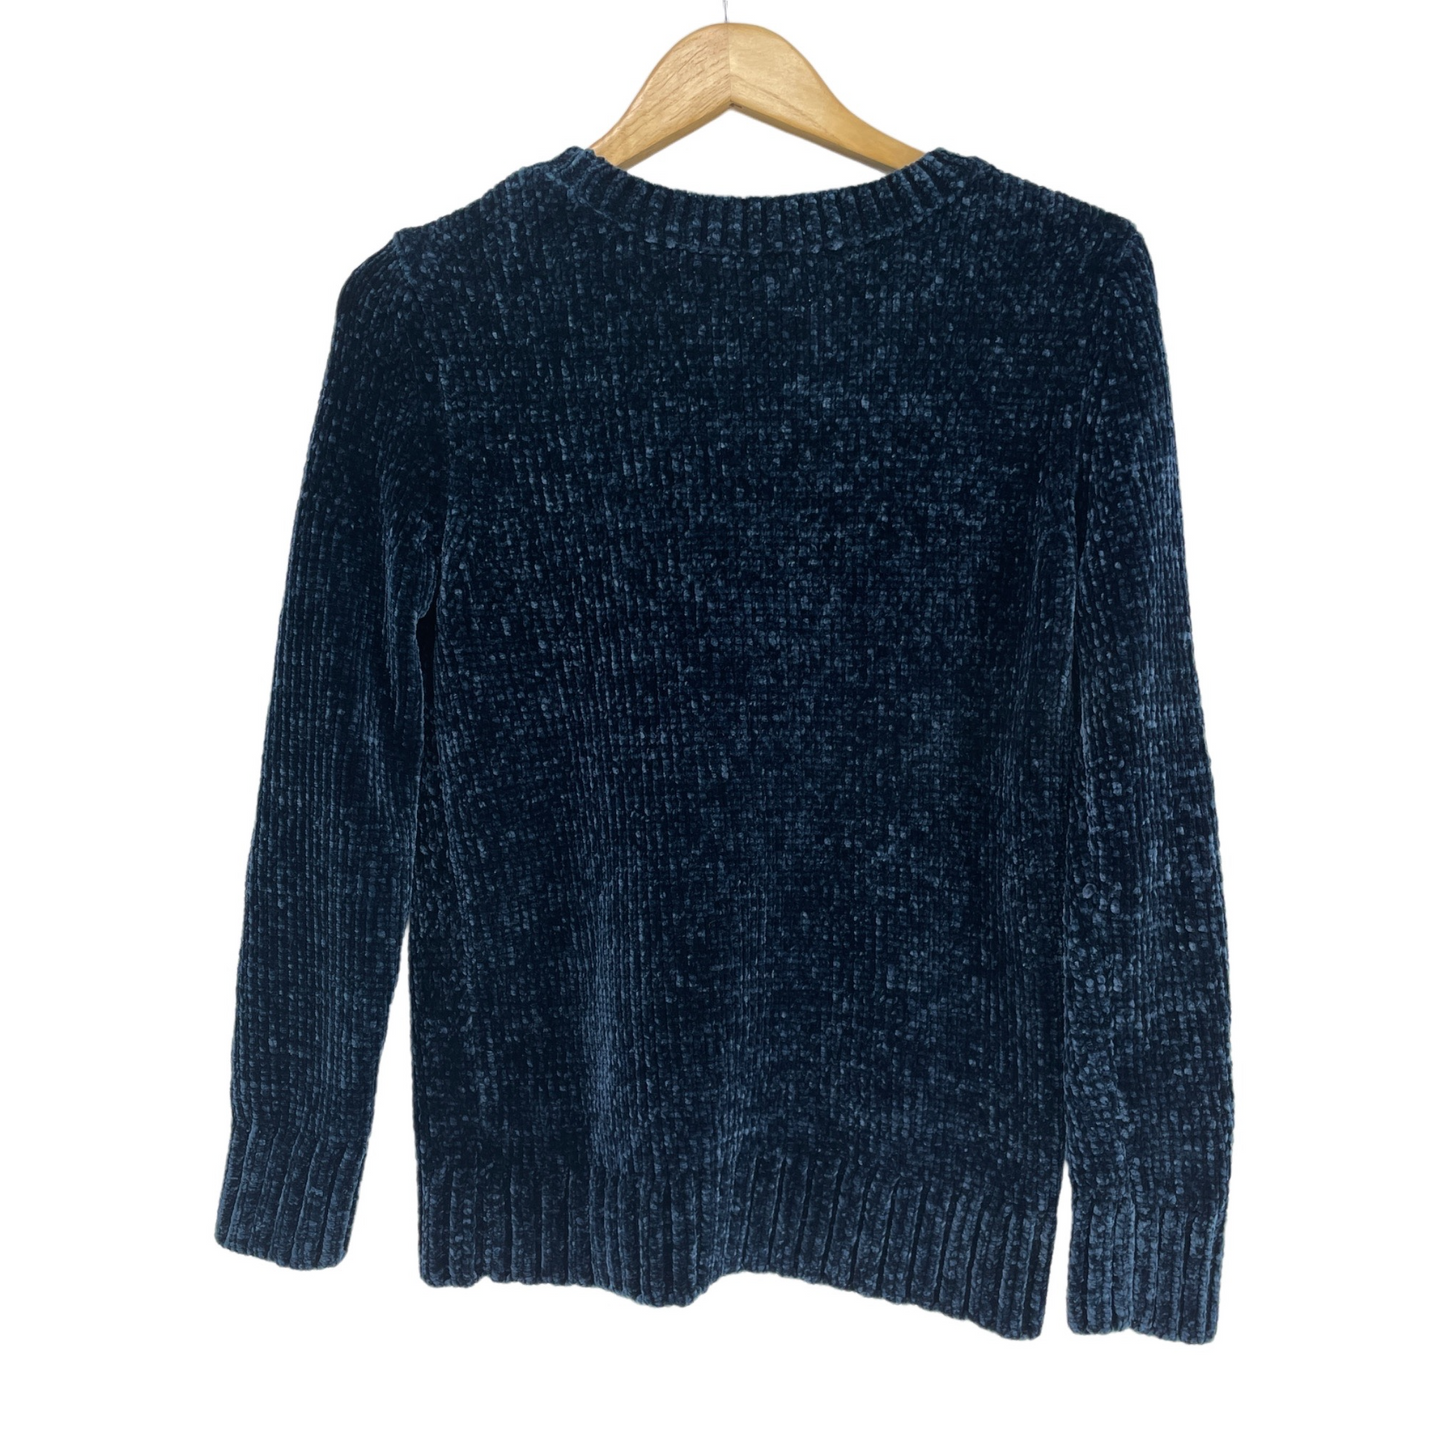 NWOT Orvis Small Navy Blue Chenille Crew Neck Sweater